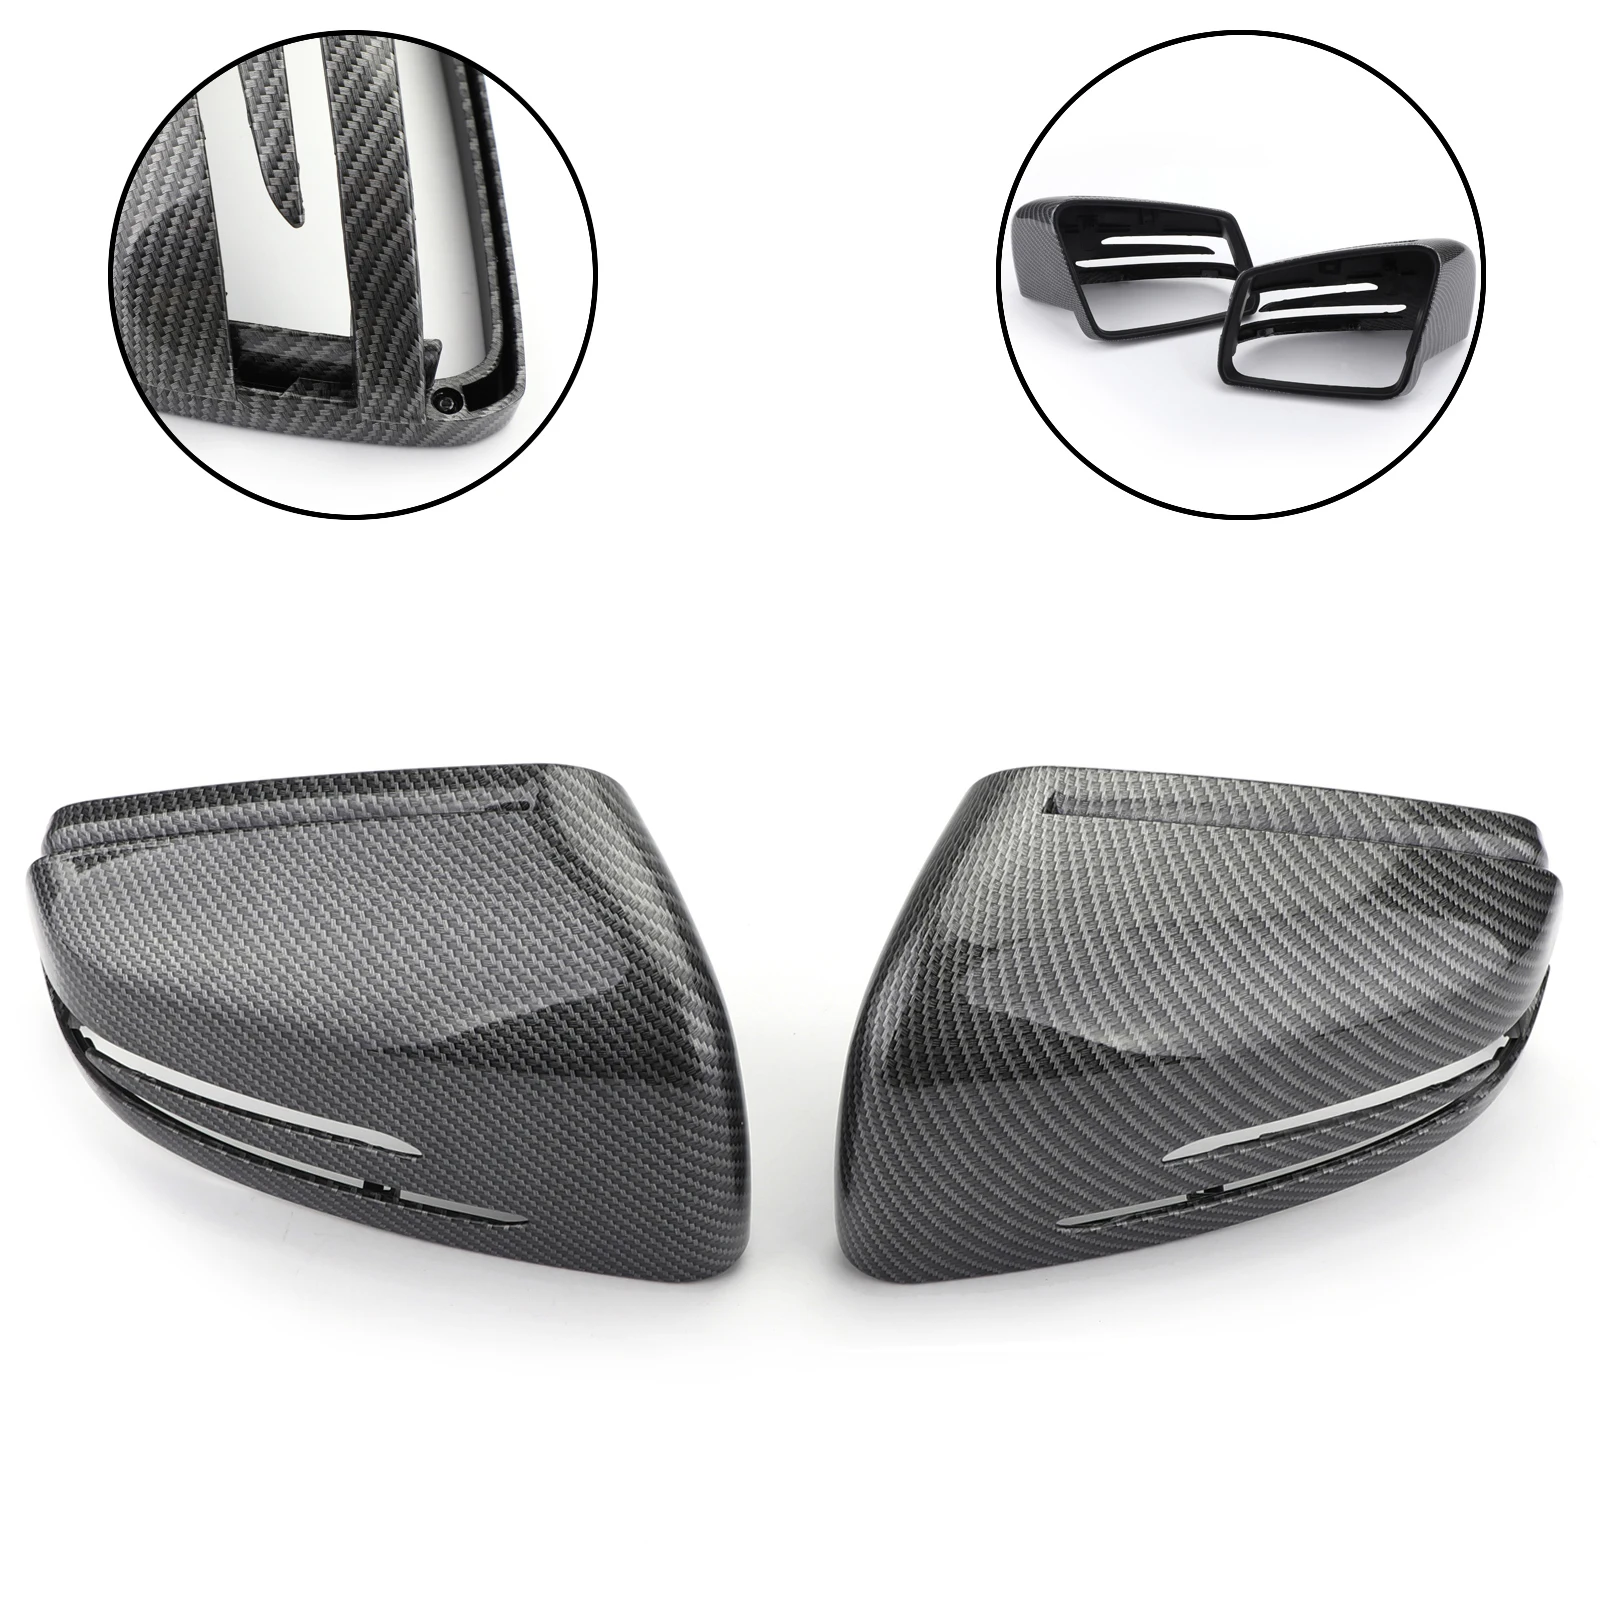 

Areyourshop Carbon Fiber Rear View Side Mirror Cover Trim For Benz 2011 12 13 14 15 16 17 2018 Benz W212 W204, As picture shown